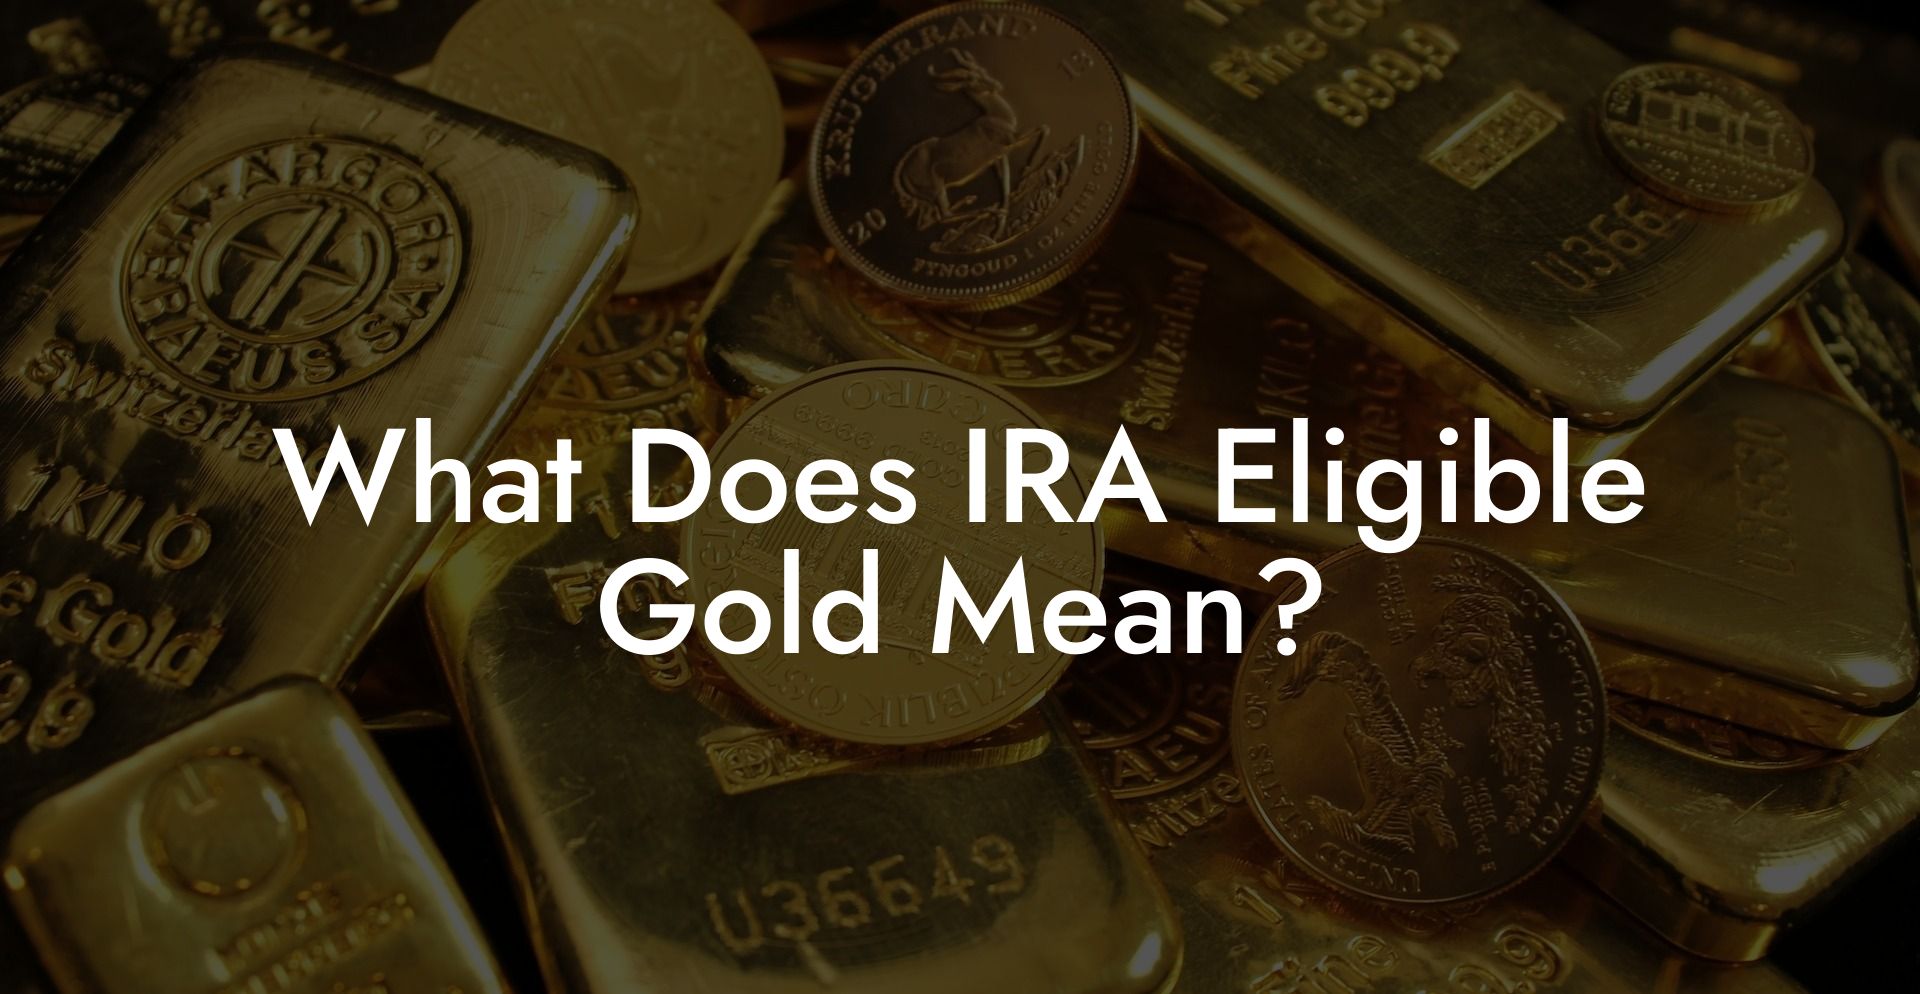 What Does IRA Eligible Gold Mean?